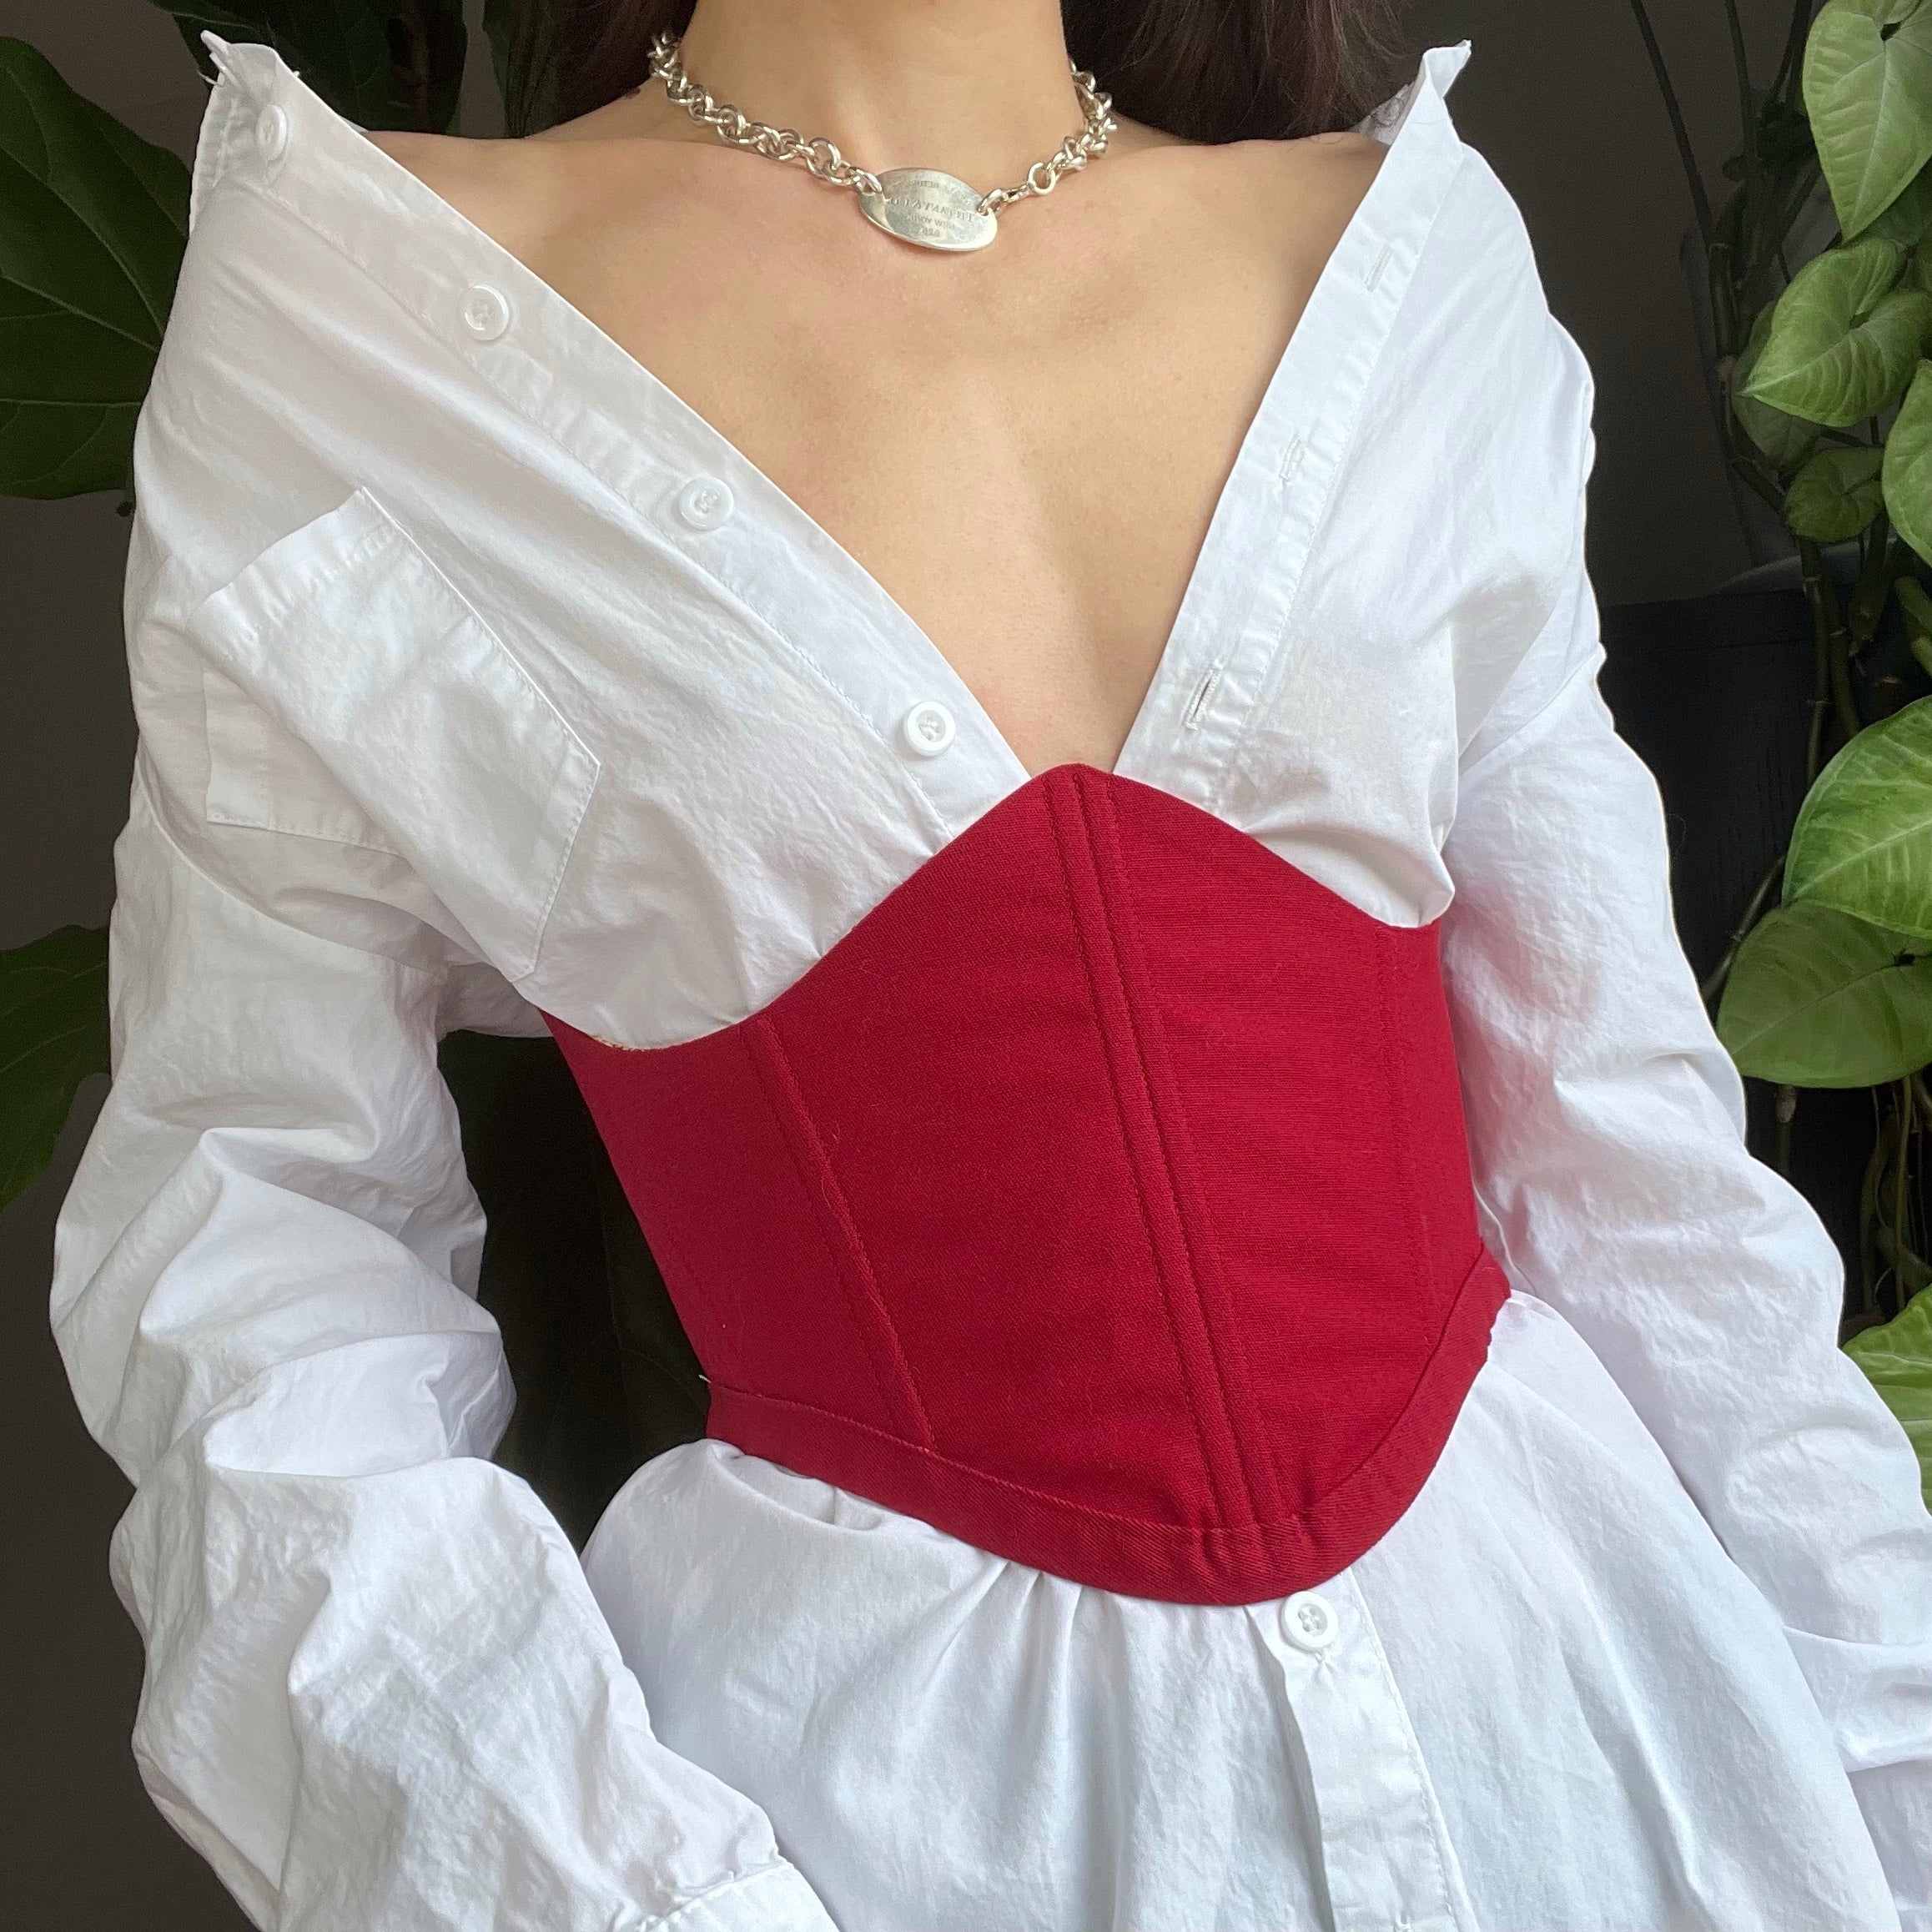 Red and Yellow Toile Corset Belt